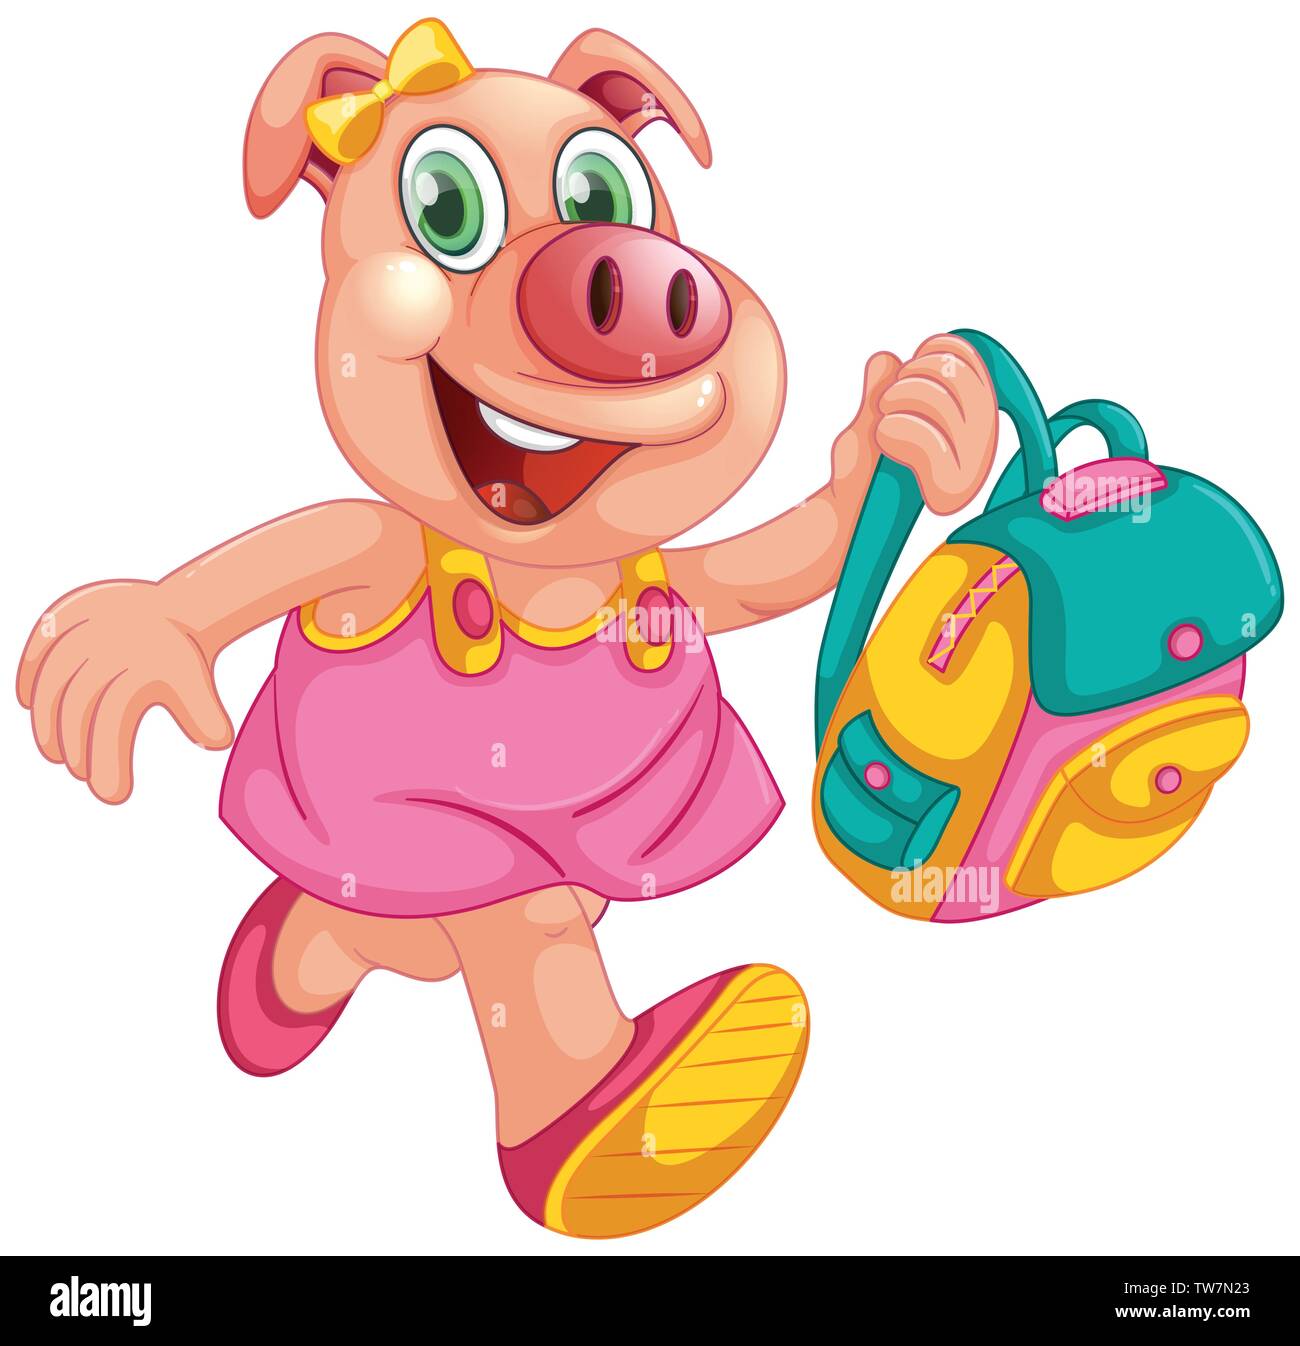 A pig student character illustration Stock Vector